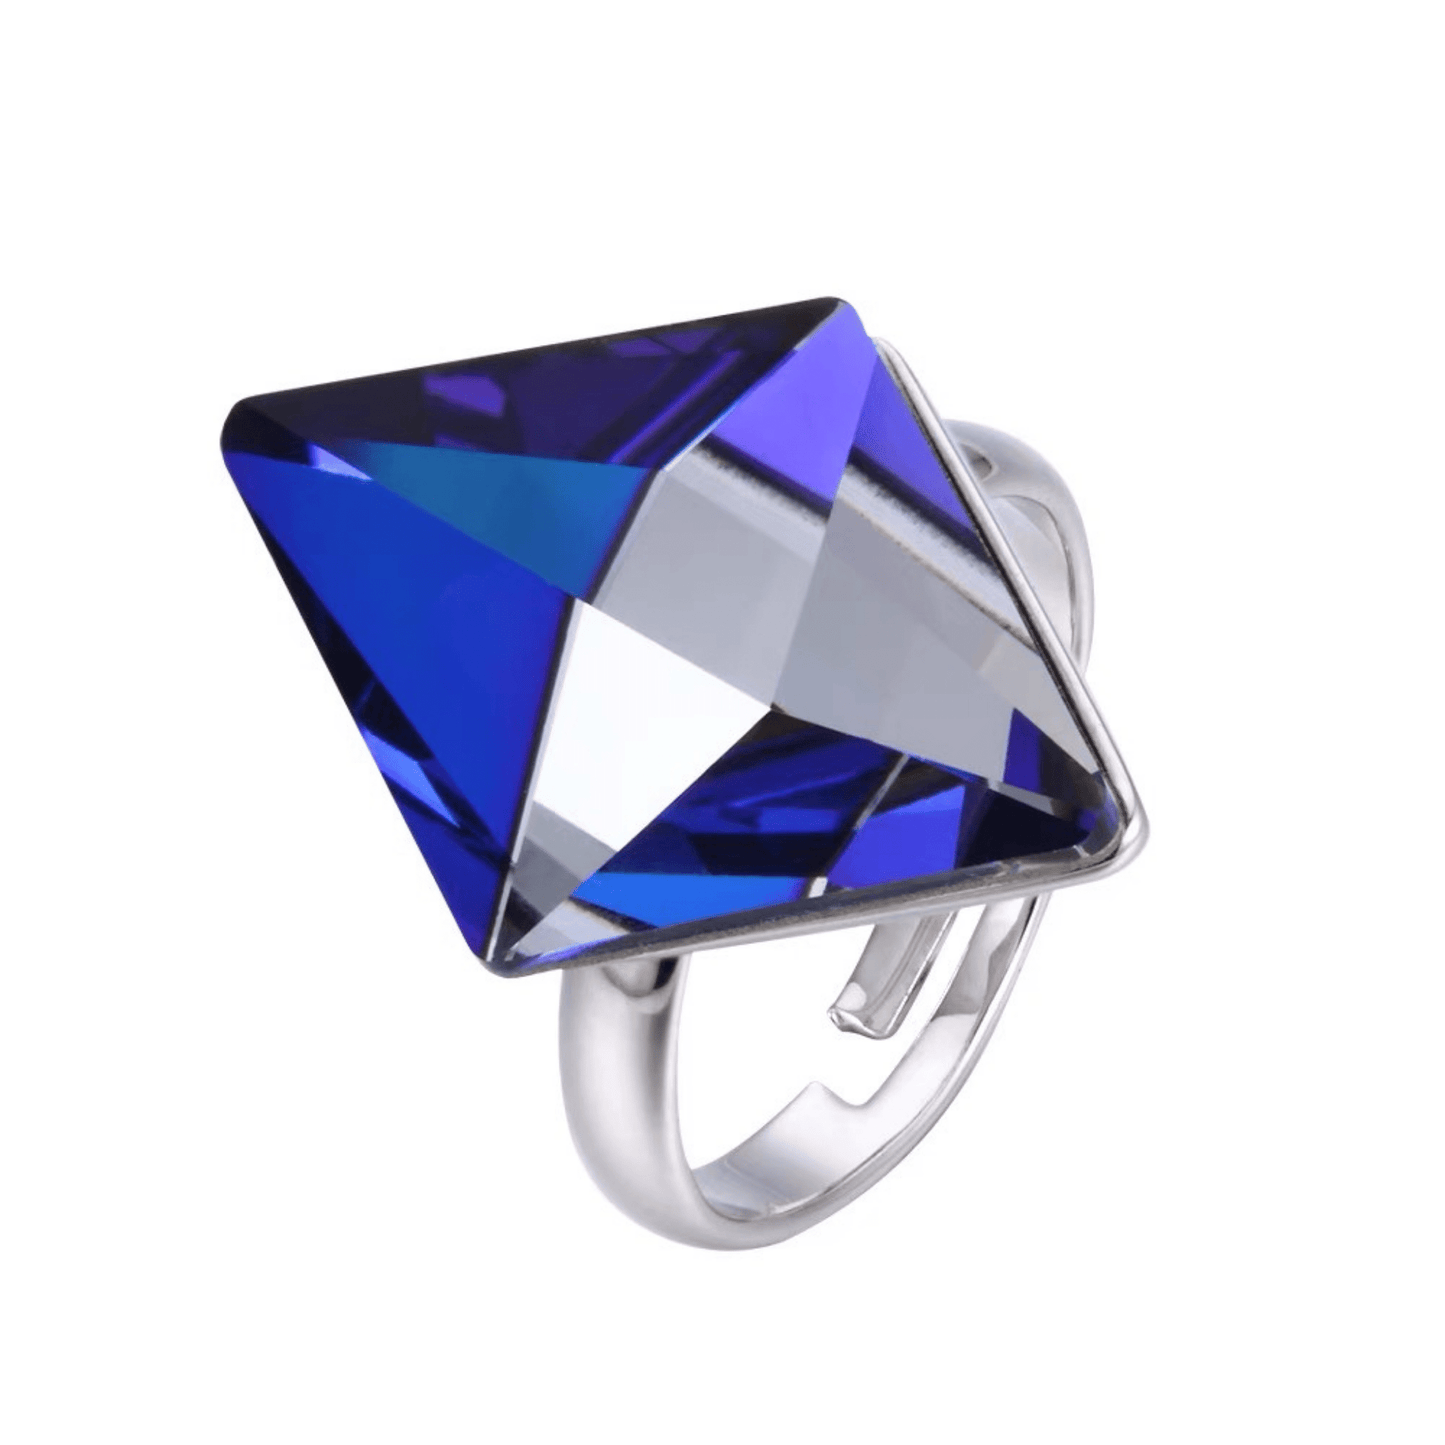 The Magical Swarovski Crystal Unique Ring